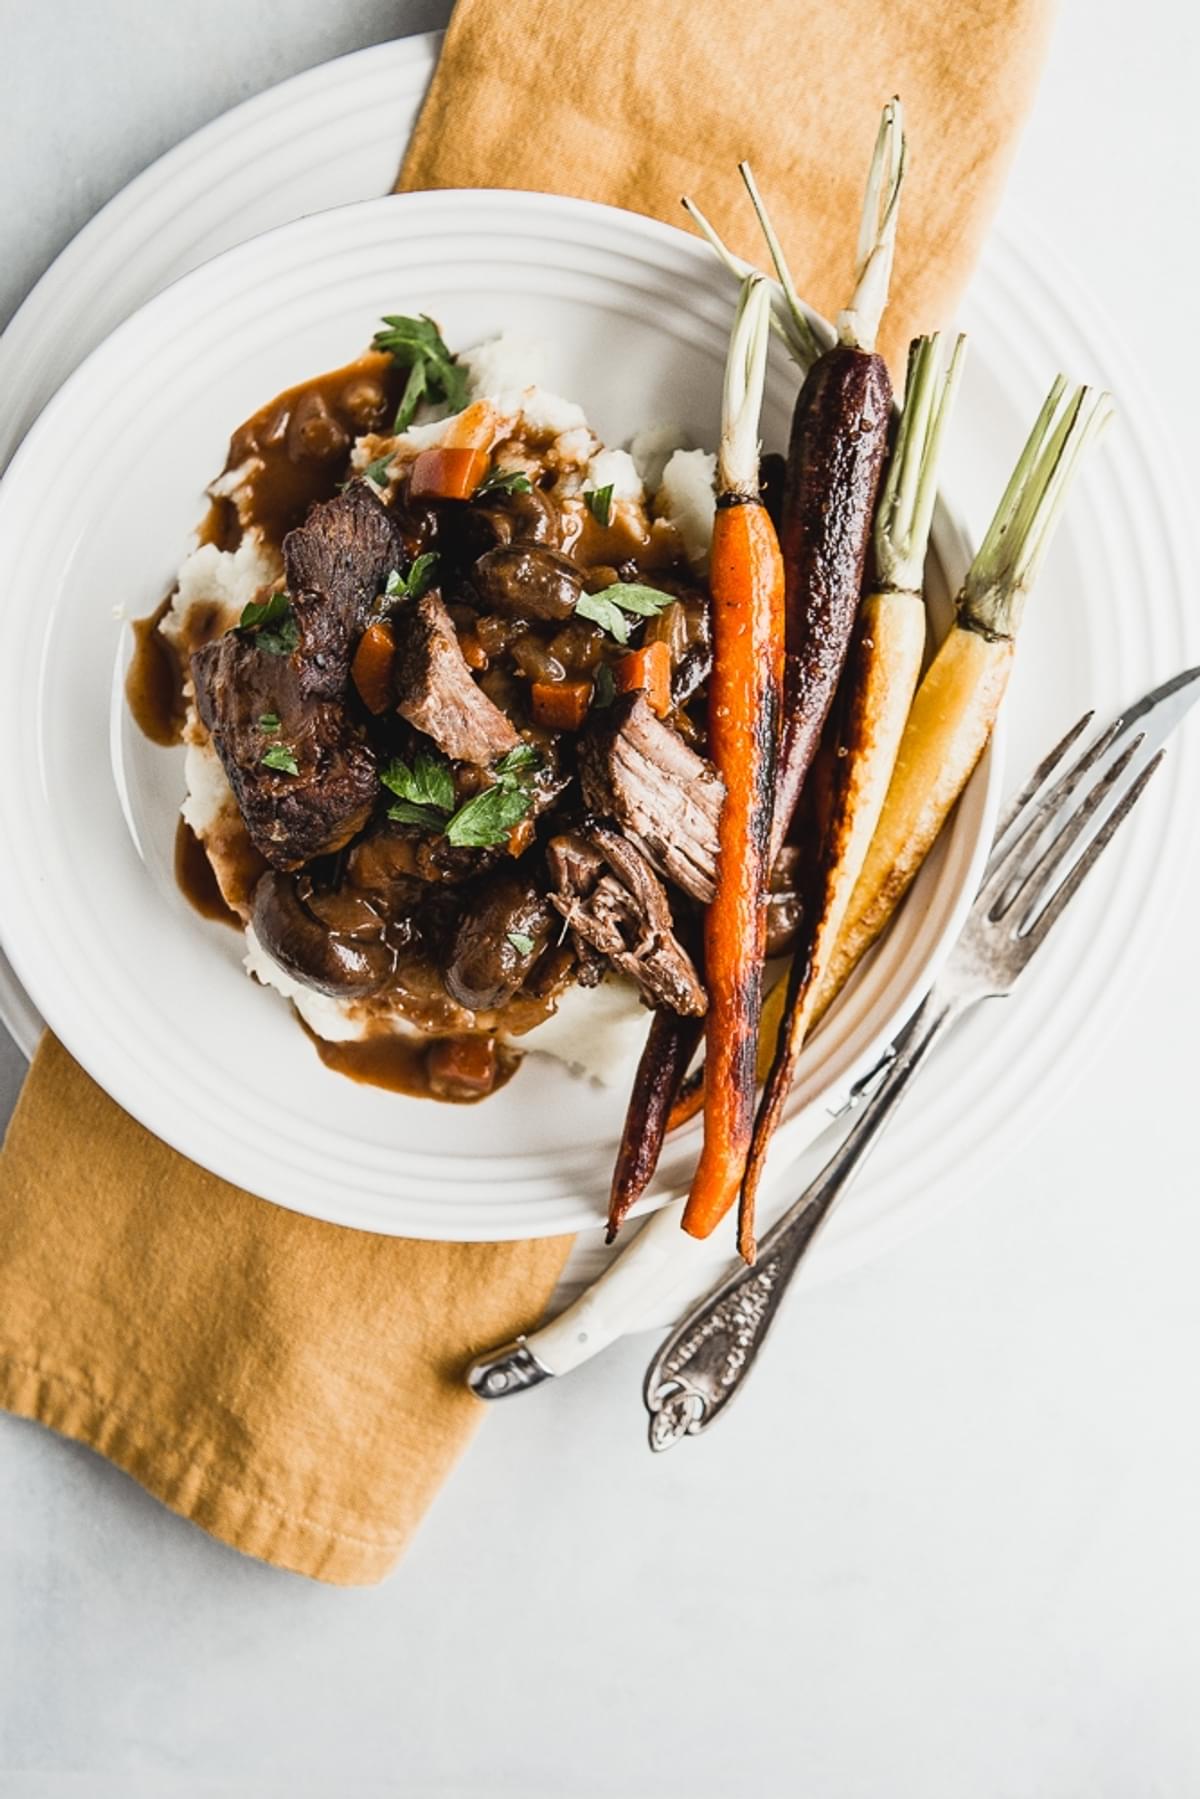 Wine Braised Beef With Mushrooms served with mashed potatoes and carrots